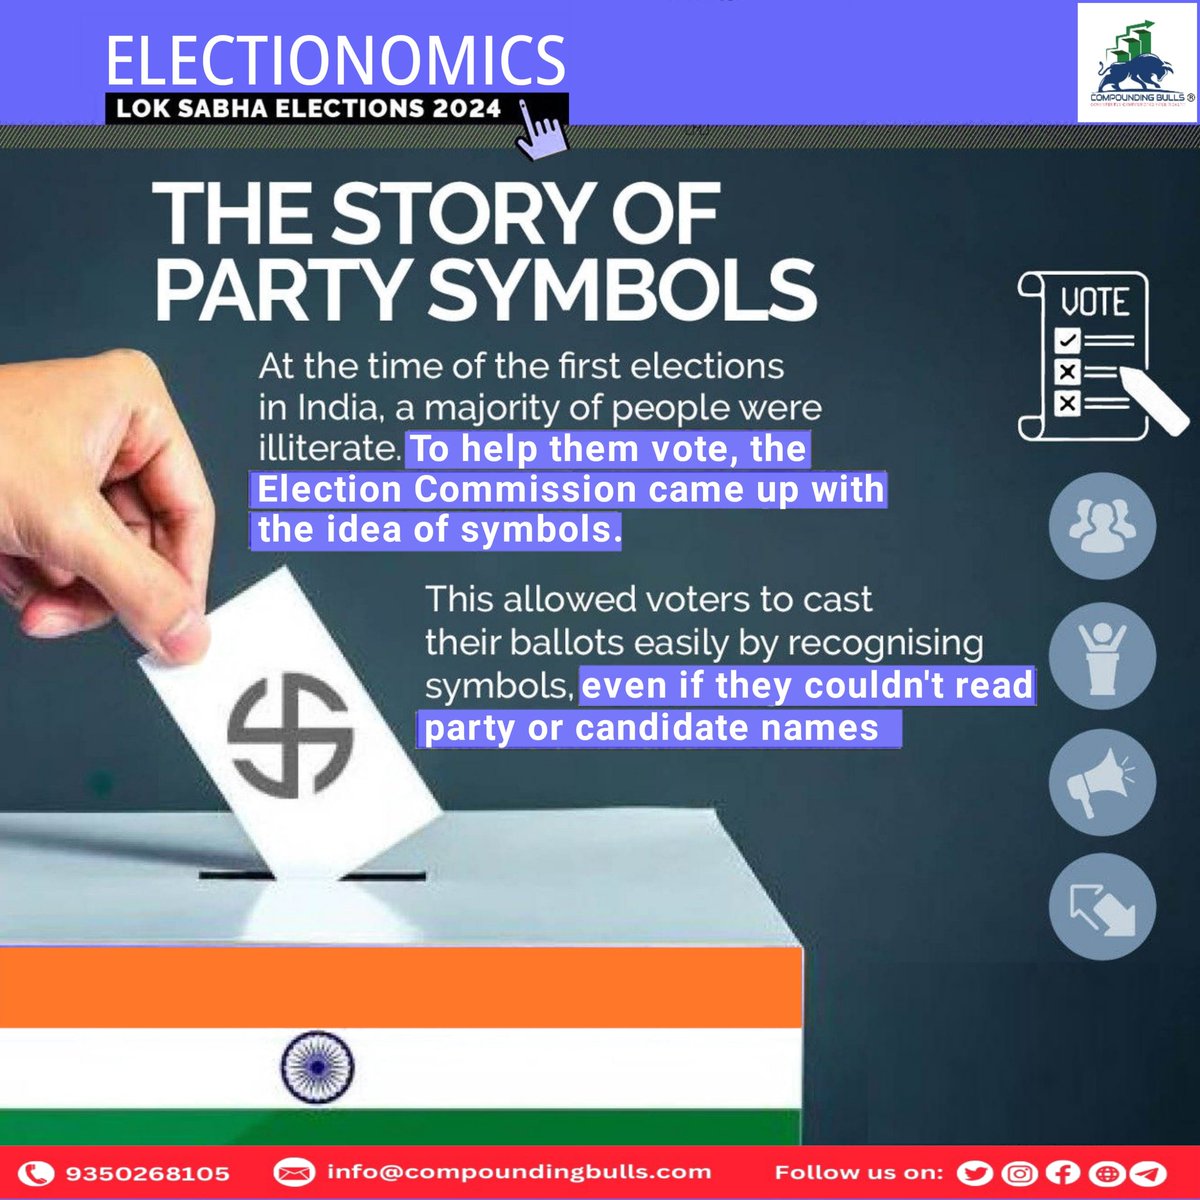 Ever wondered about the significance of party symbols? The fascinating tale behind party symbols: from their humble origins to their powerful impact on elections. Dive into the history of democracy's visual language. 

#Electionomics #CompoundingBulls #ElectionHistory